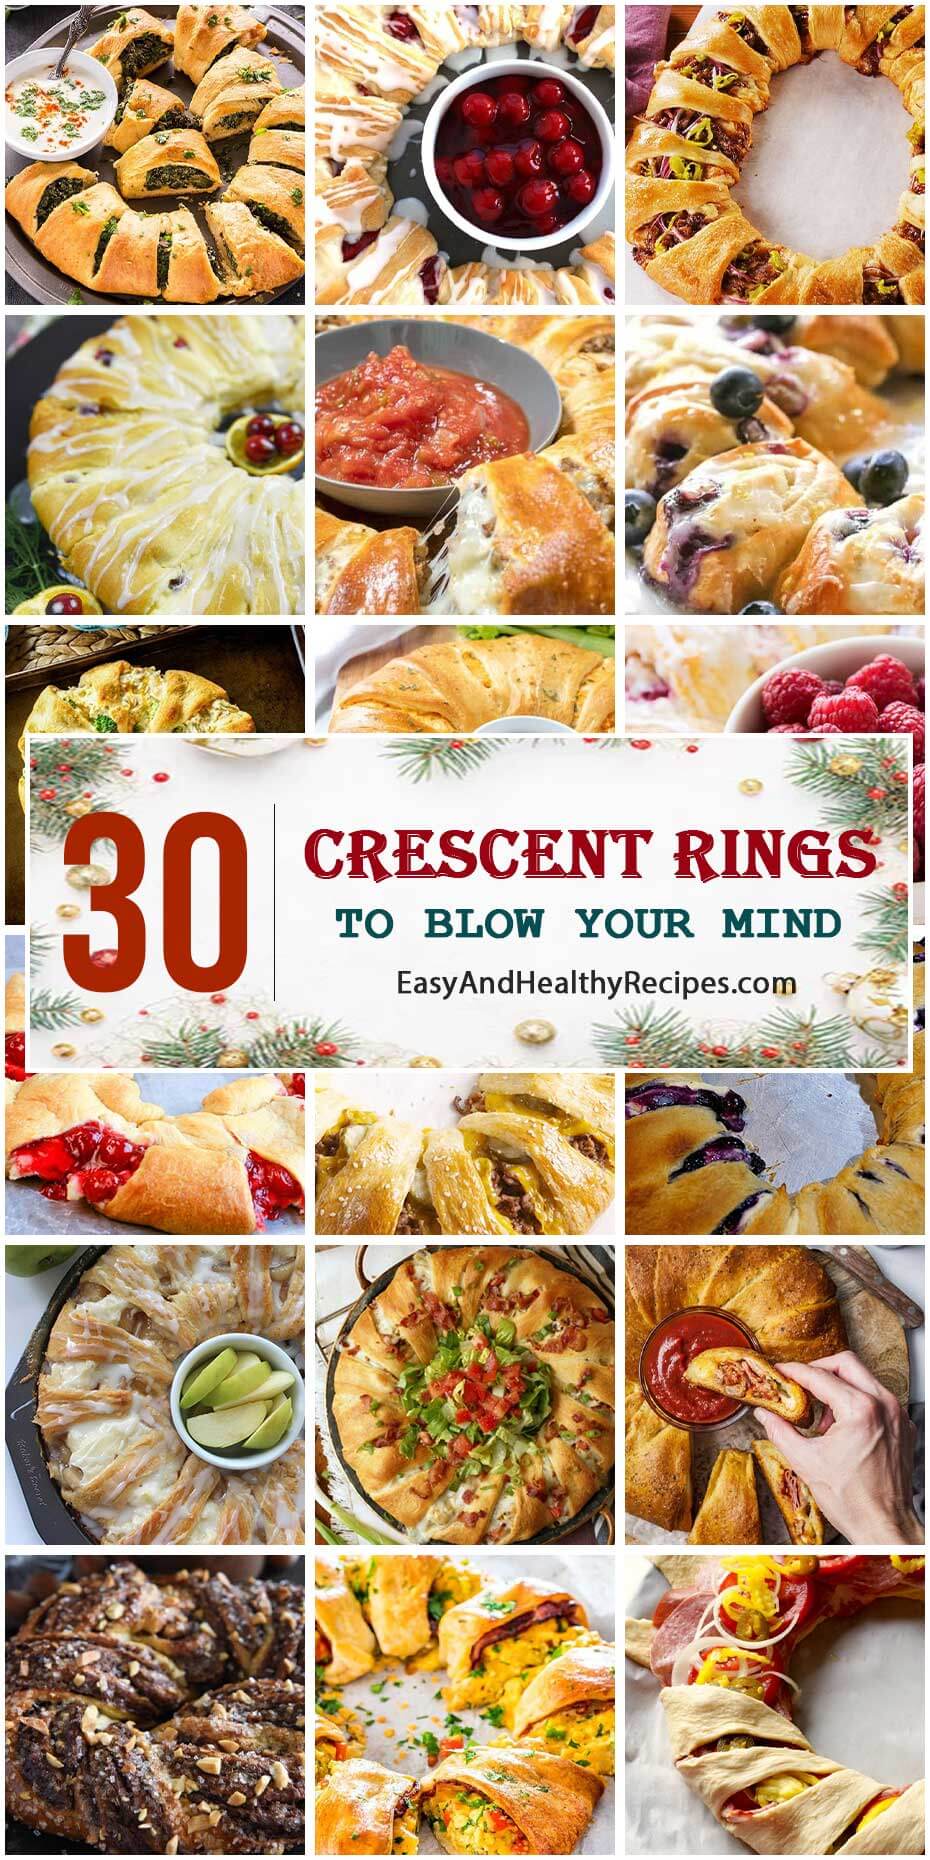 30 Crescent Rings To Blow Your Mind